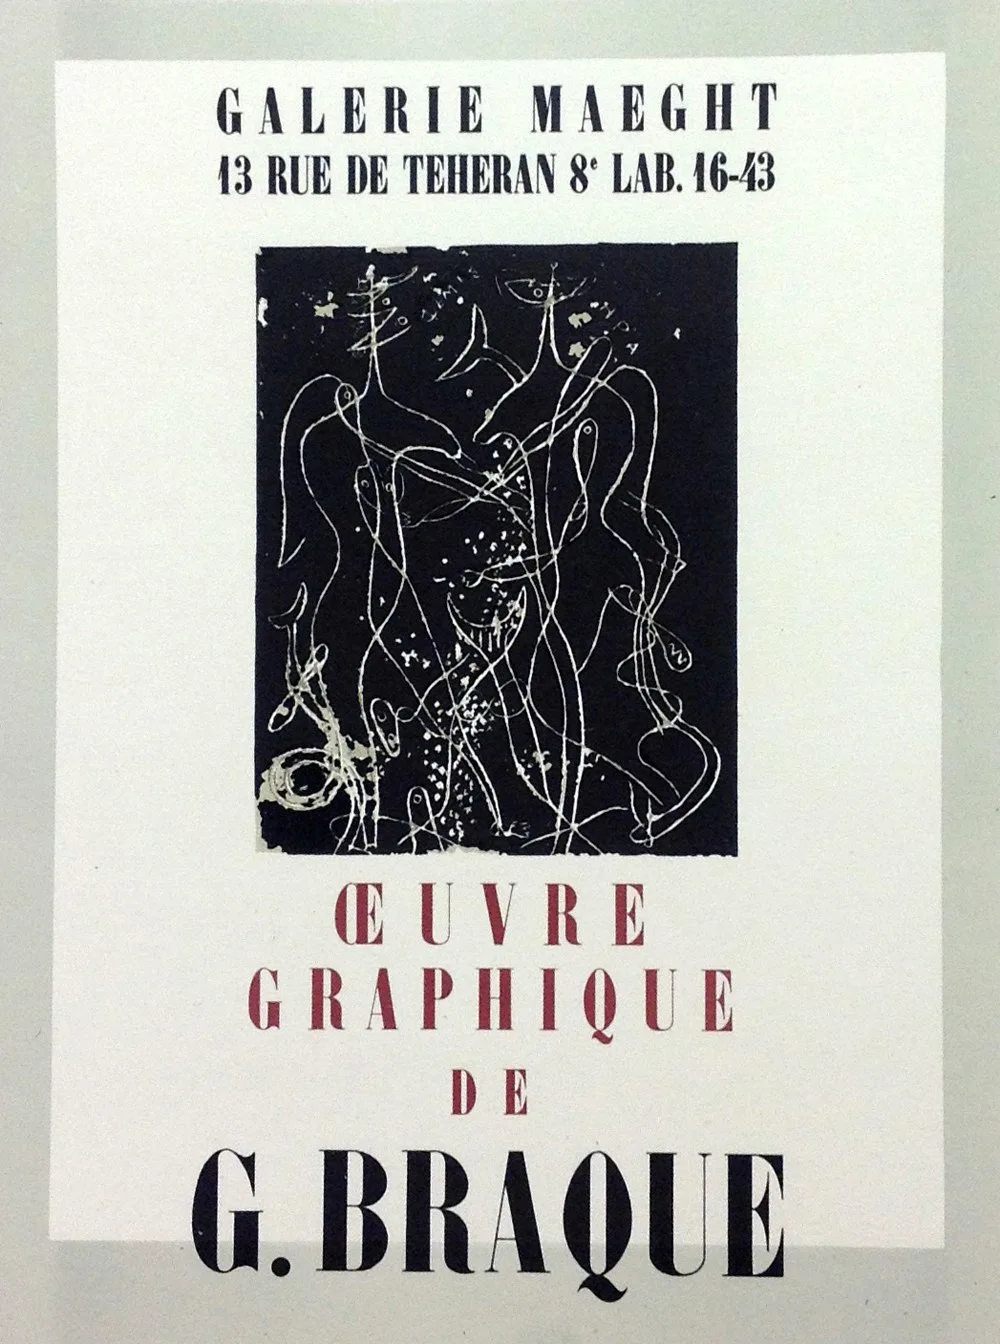 Braque 2 "Oeuvre Graphique" Mourlot 1959 Art in posters